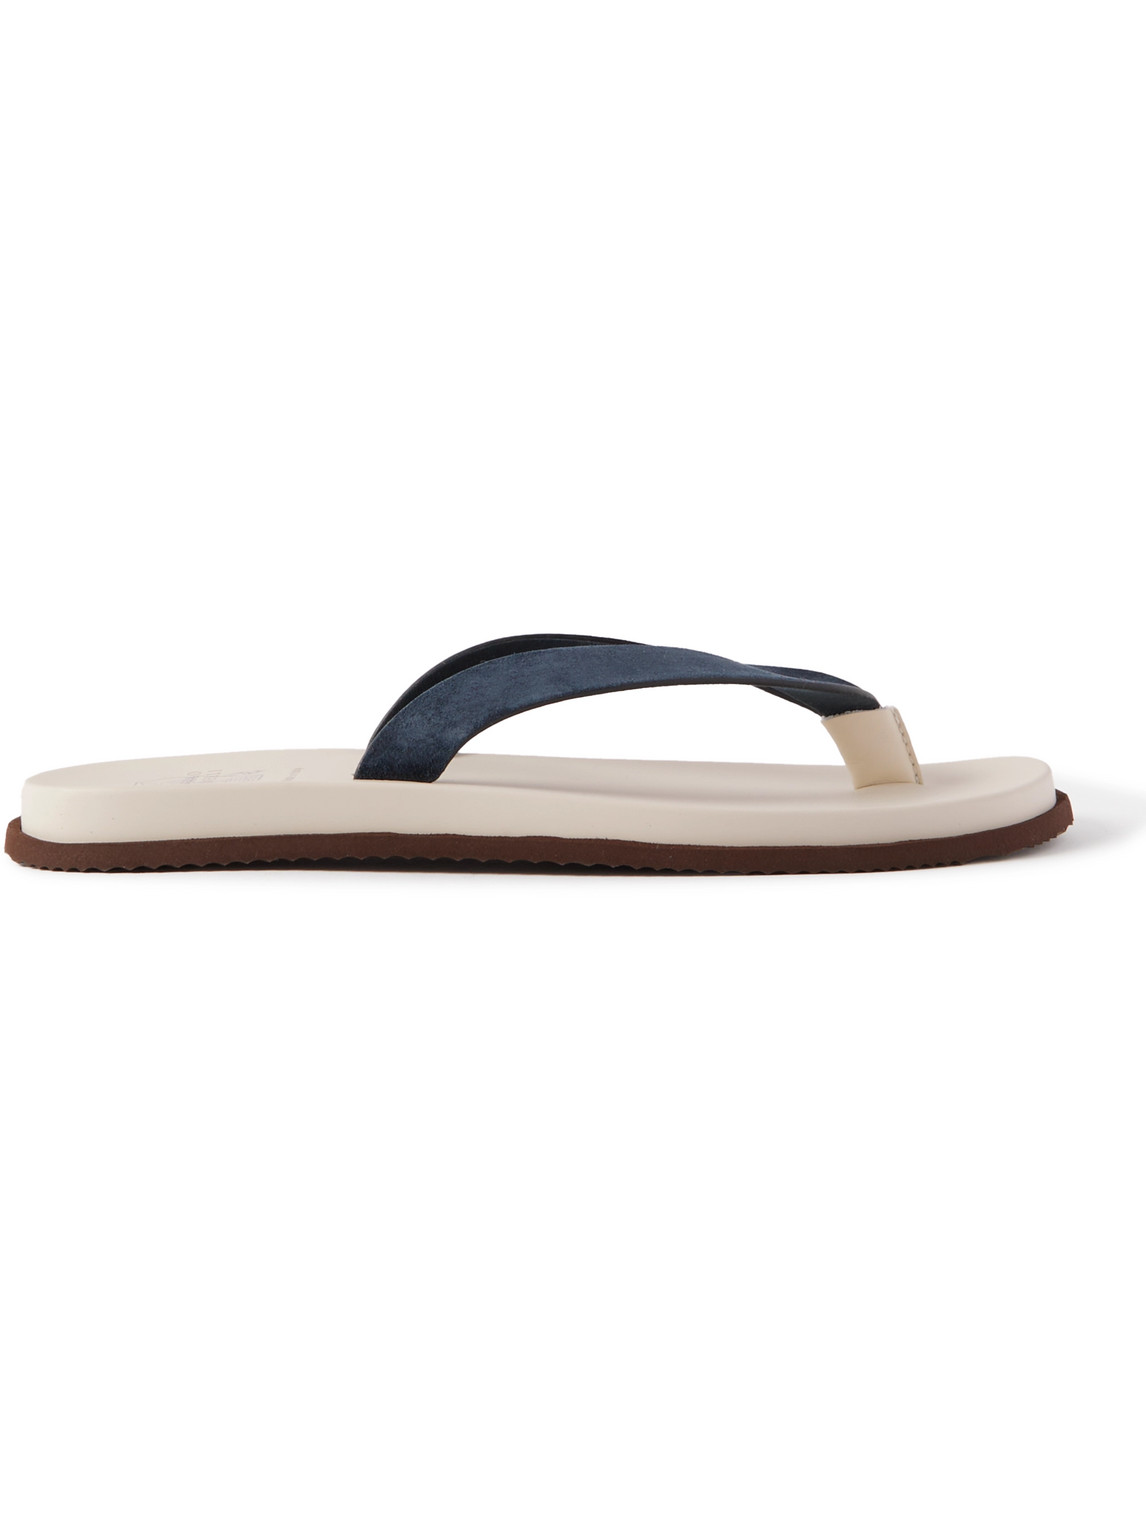 BRUNELLO CUCINELLI SUEDE AND LEATHER FLIP FLOPS